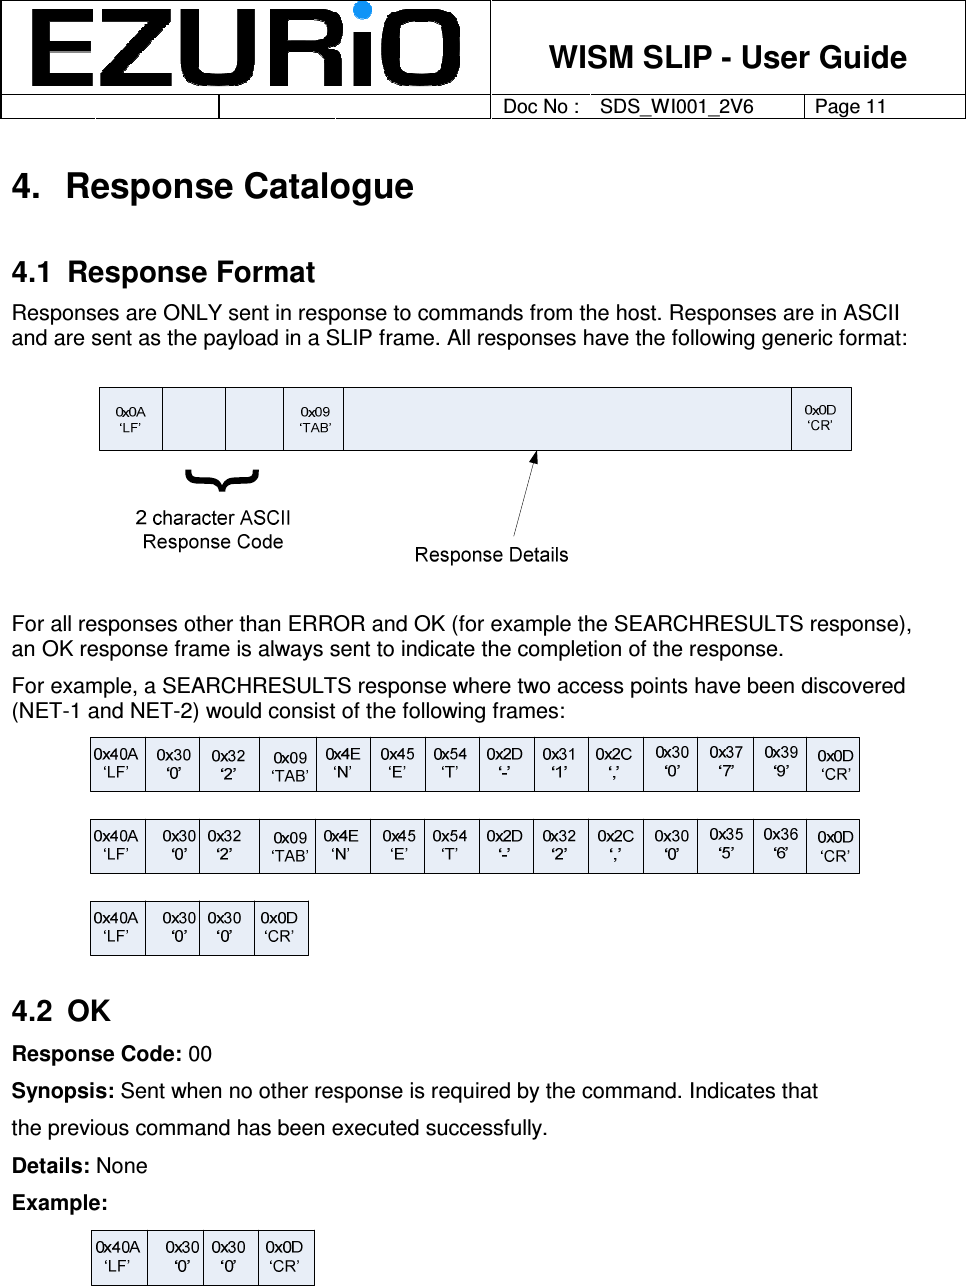    WISM SLIP - User Guide         Doc No : SDS_WI001_2V6 Page 11     4.  Response Catalogue 4.1  Response Format Responses are ONLY sent in response to commands from the host. Responses are in ASCII and are sent as the payload in a SLIP frame. All responses have the following generic format:  For all responses other than ERROR and OK (for example the SEARCHRESULTS response), an OK response frame is always sent to indicate the completion of the response.    For example, a SEARCHRESULTS response where two access points have been discovered (NET-1 and NET-2) would consist of the following frames:  4.2  OK Response Code: 00 Synopsis: Sent when no other response is required by the command. Indicates that  the previous command has been executed successfully.  Details: None Example:     